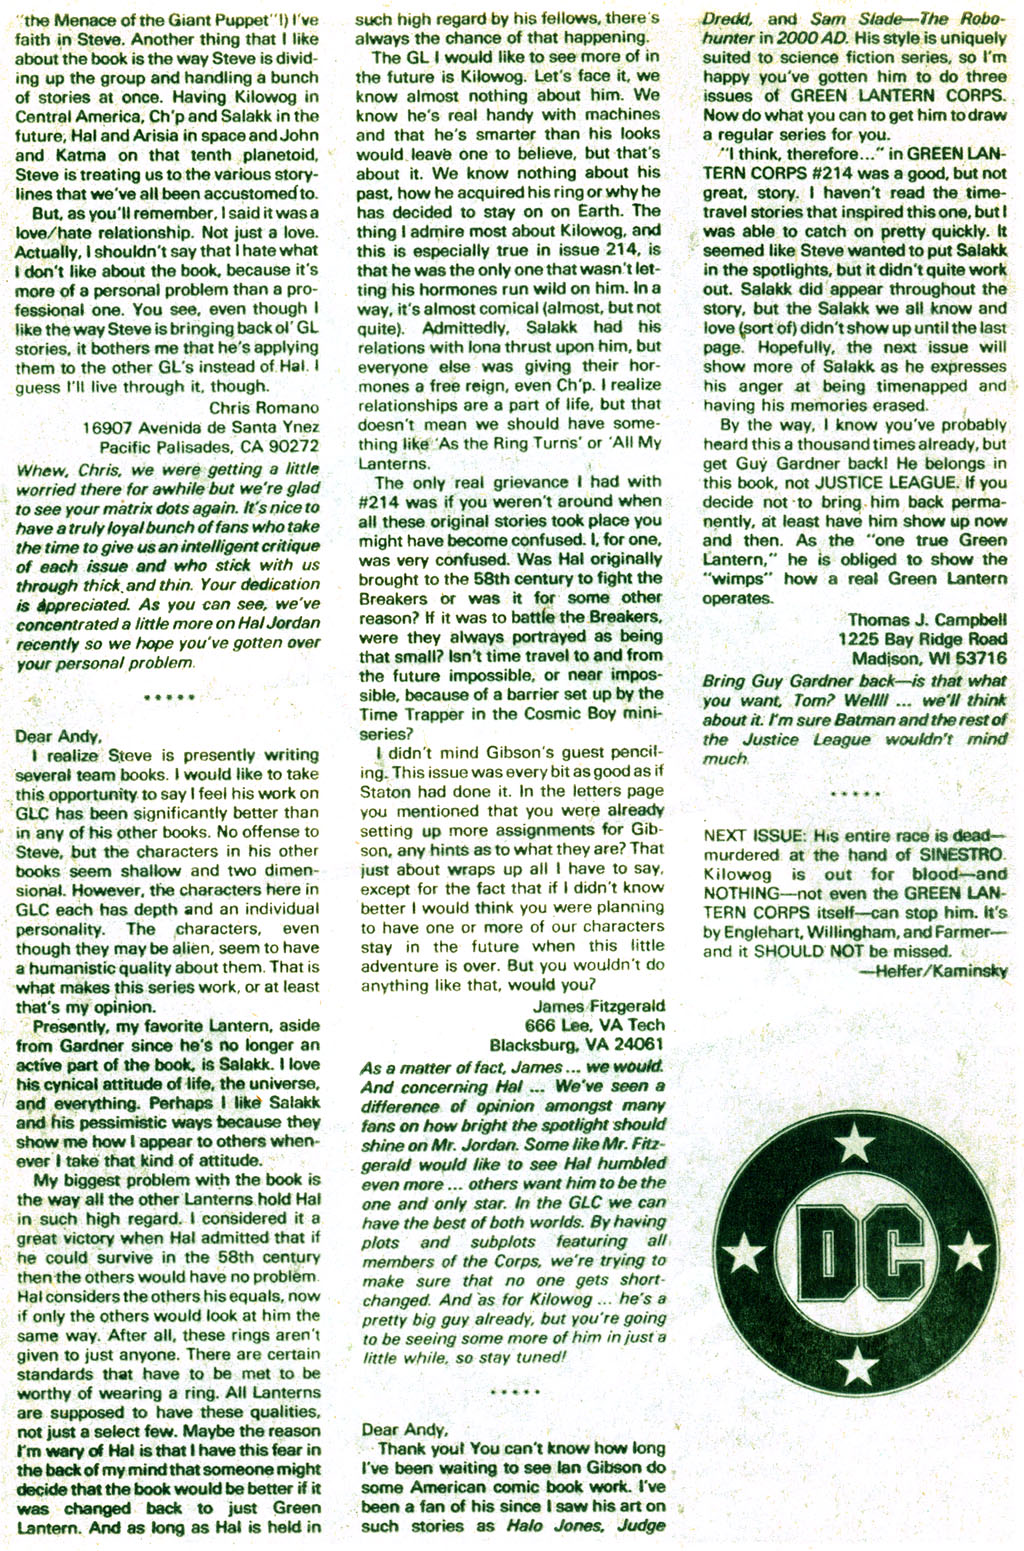 Read online The Green Lantern Corps comic -  Issue #218 - 24